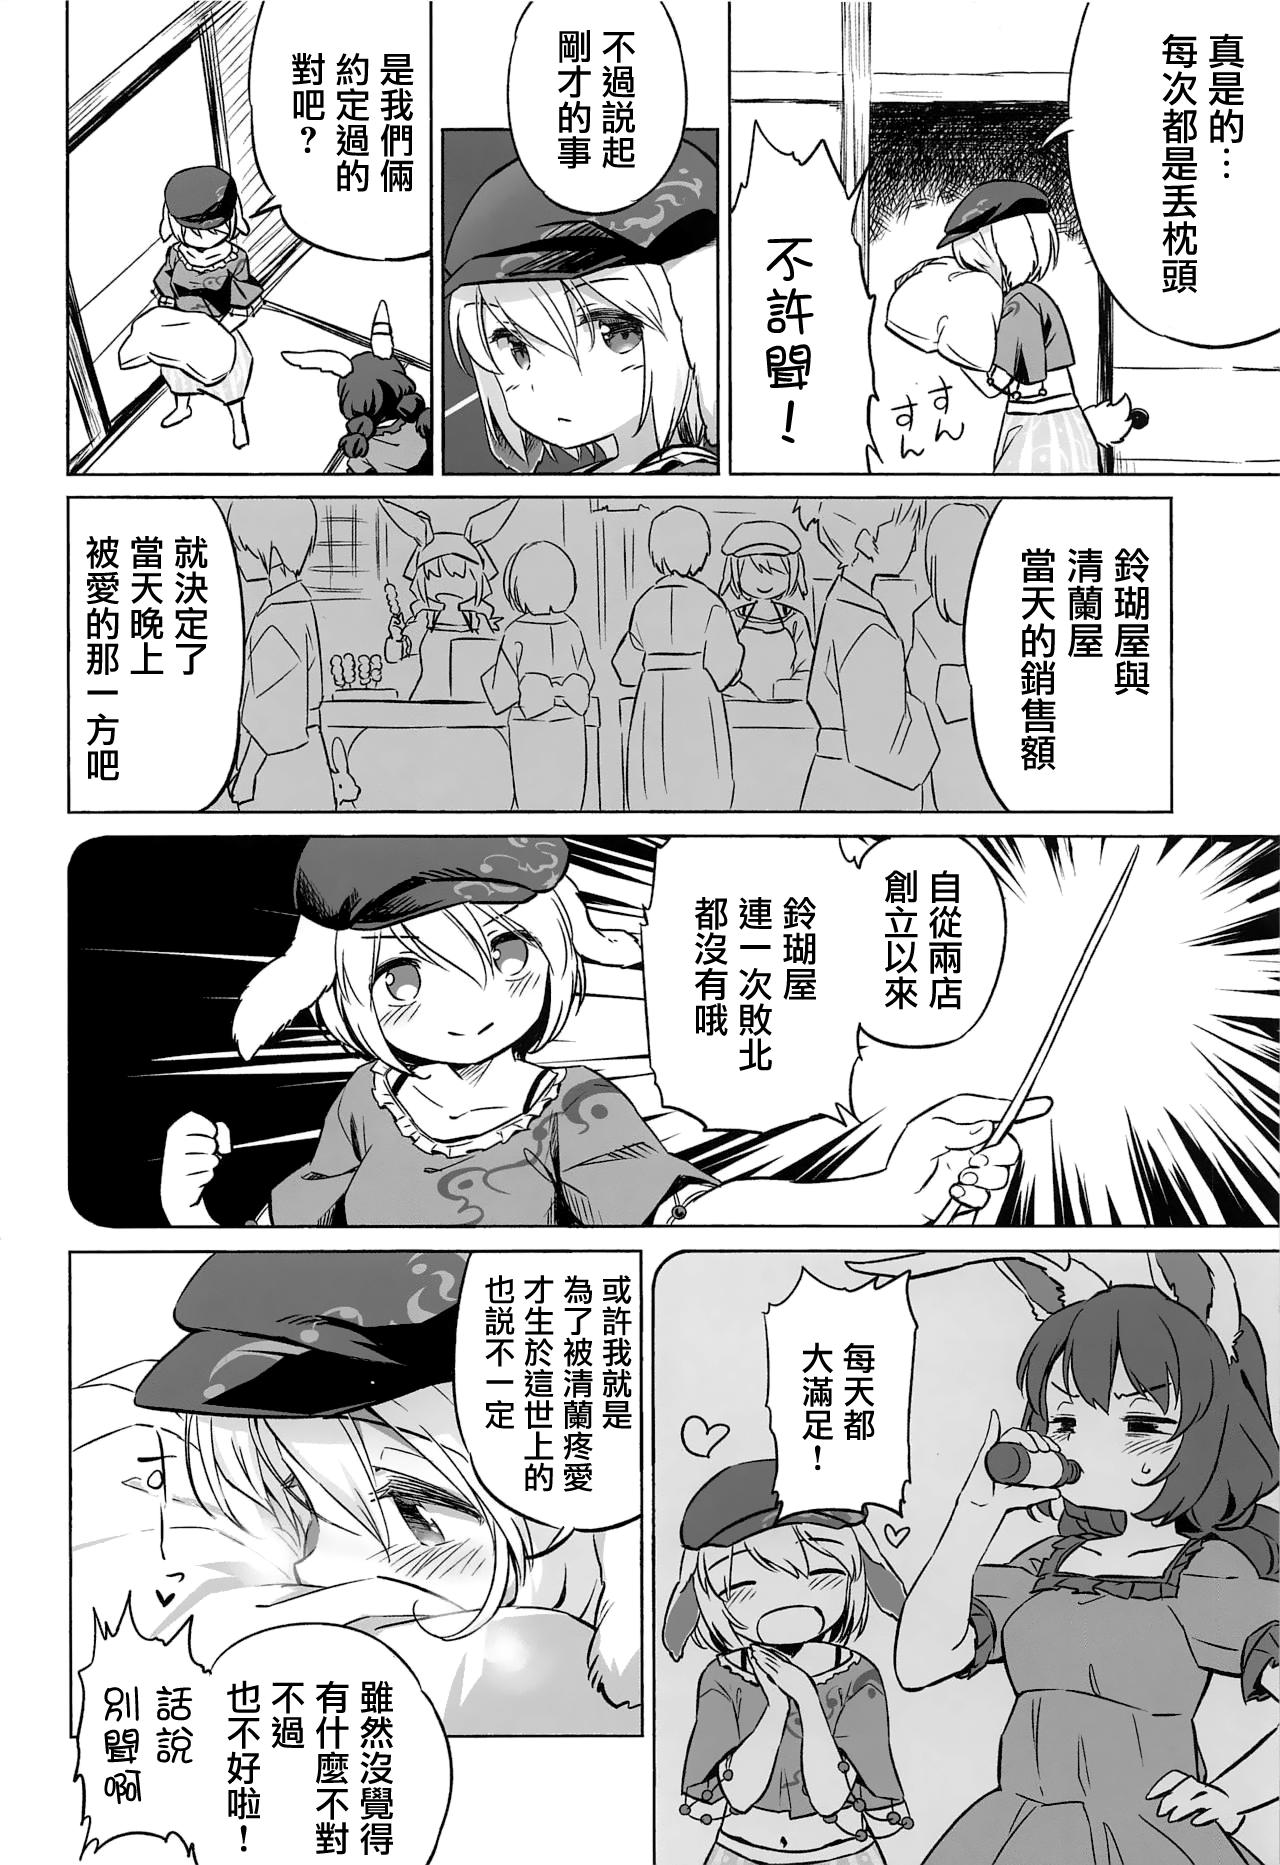 Casal Granny Smith Mating - Touhou project Passionate - Page 7